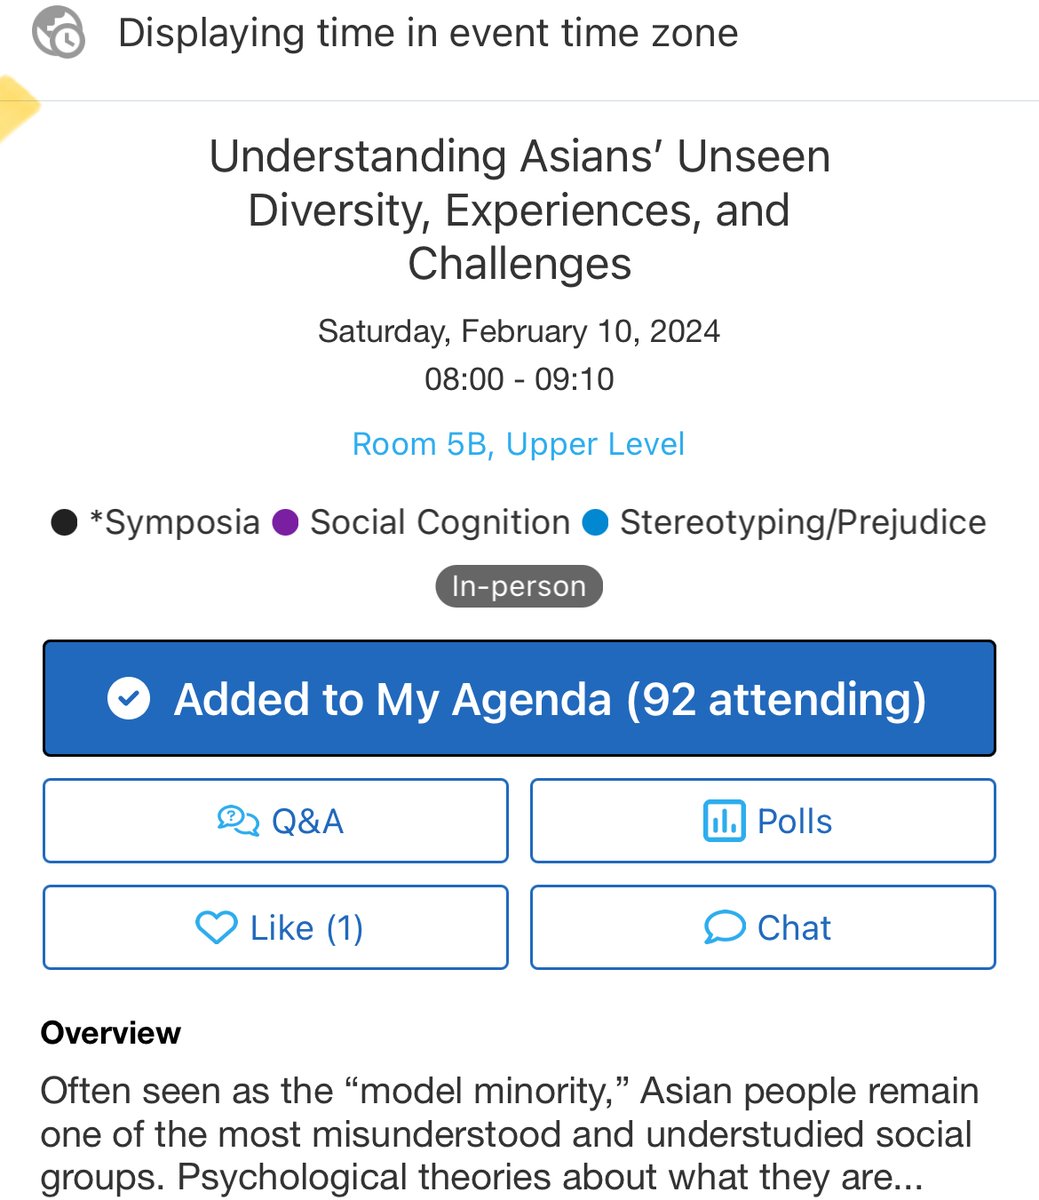 Join us in 🚨Understanding Asians' Unseen Diversity, Experiences, and Challenges 🚨at #SPSP2024  to hear about cutting-edge research on Asian people's experiences. Co-hosting with the eminent Prof. Jackson Lu from MIT Sloan 🧵1/5